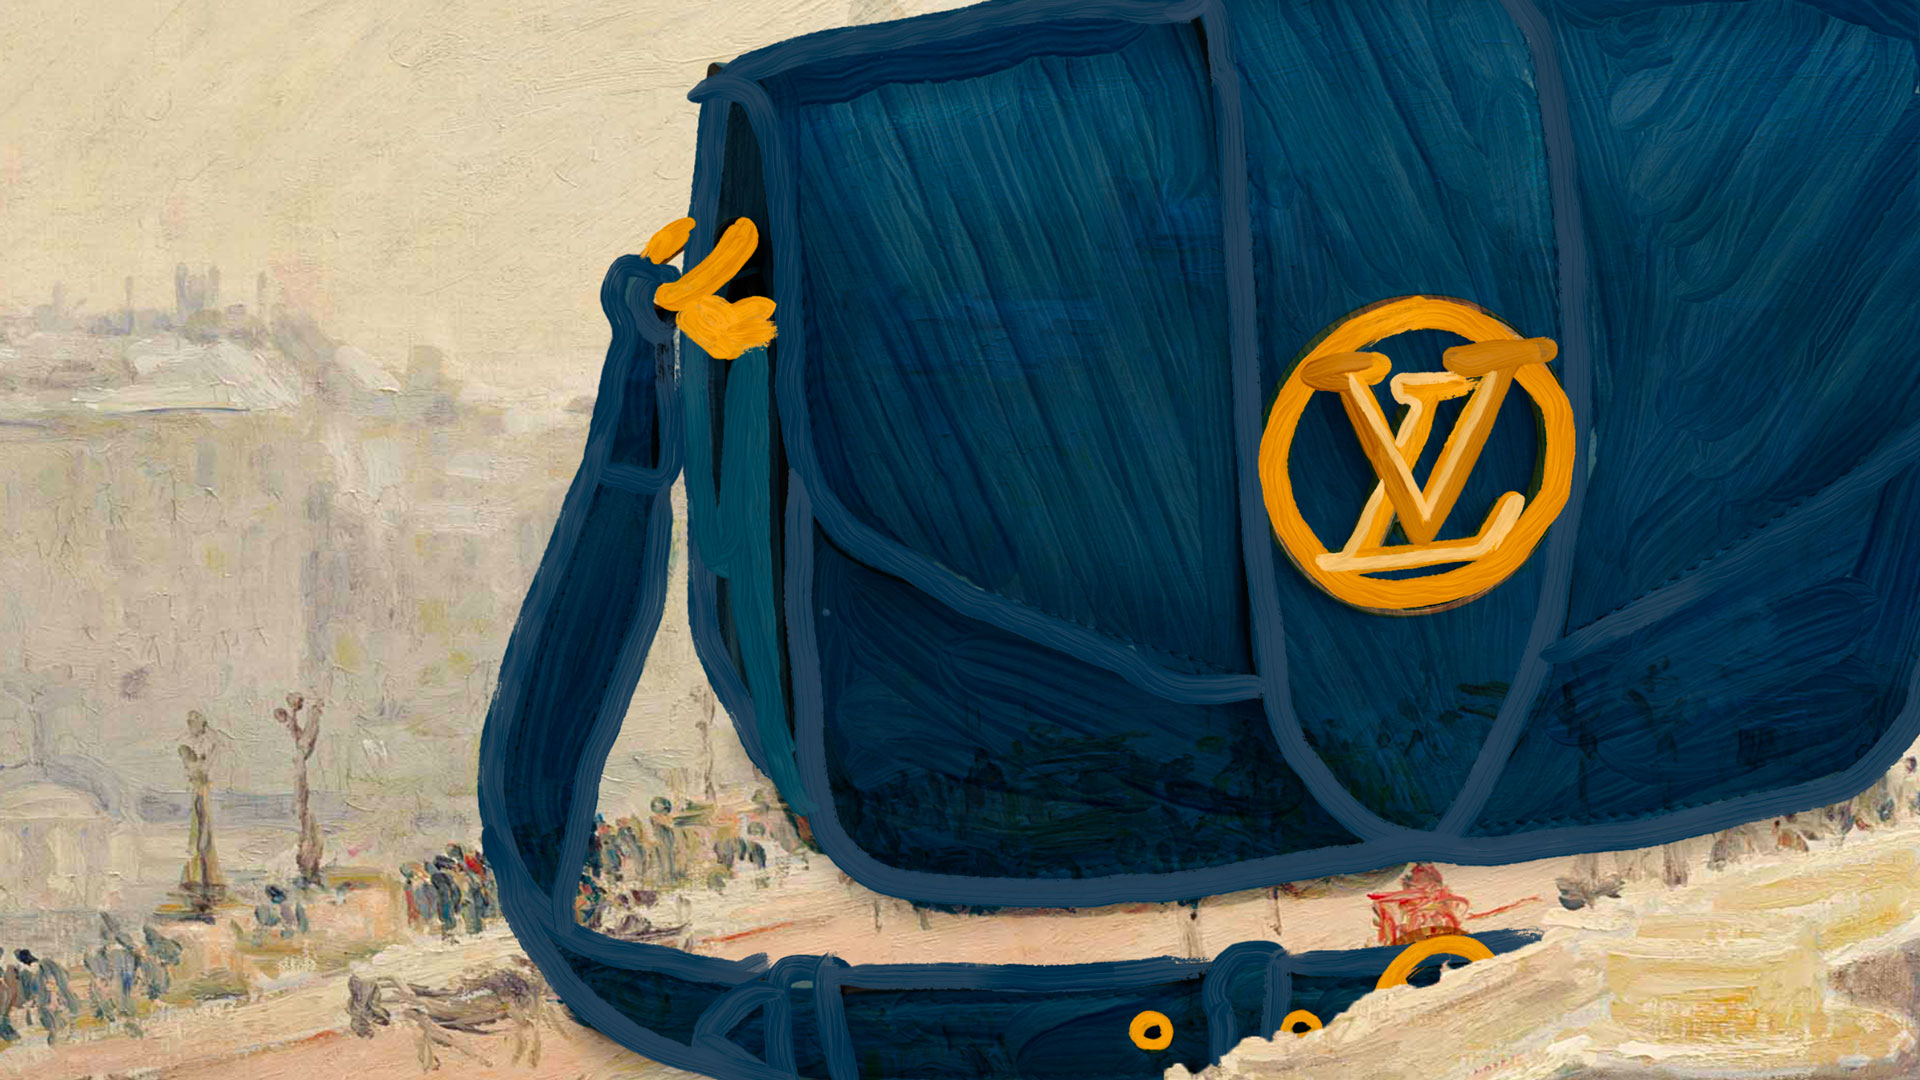 Louis Vuitton on X: #LVFW19 Bridging past to present. The new LV